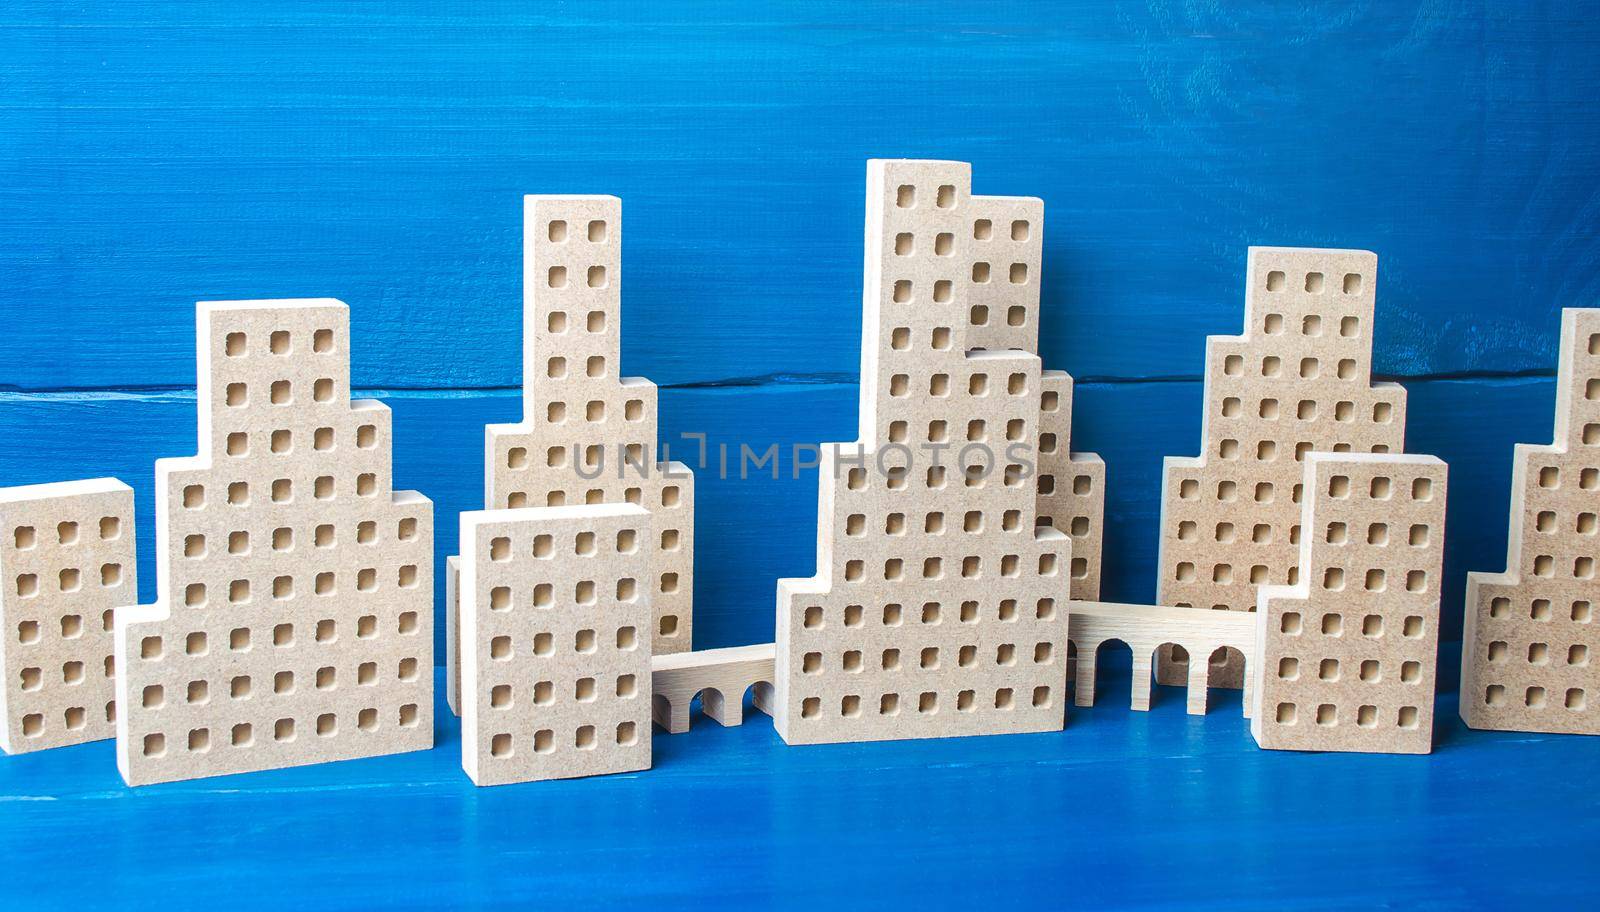 City of figures of buildings on a blue background. Concept for real estate, urban environment and transport infrastructure. City management and planning. Construction industry, growth and development.